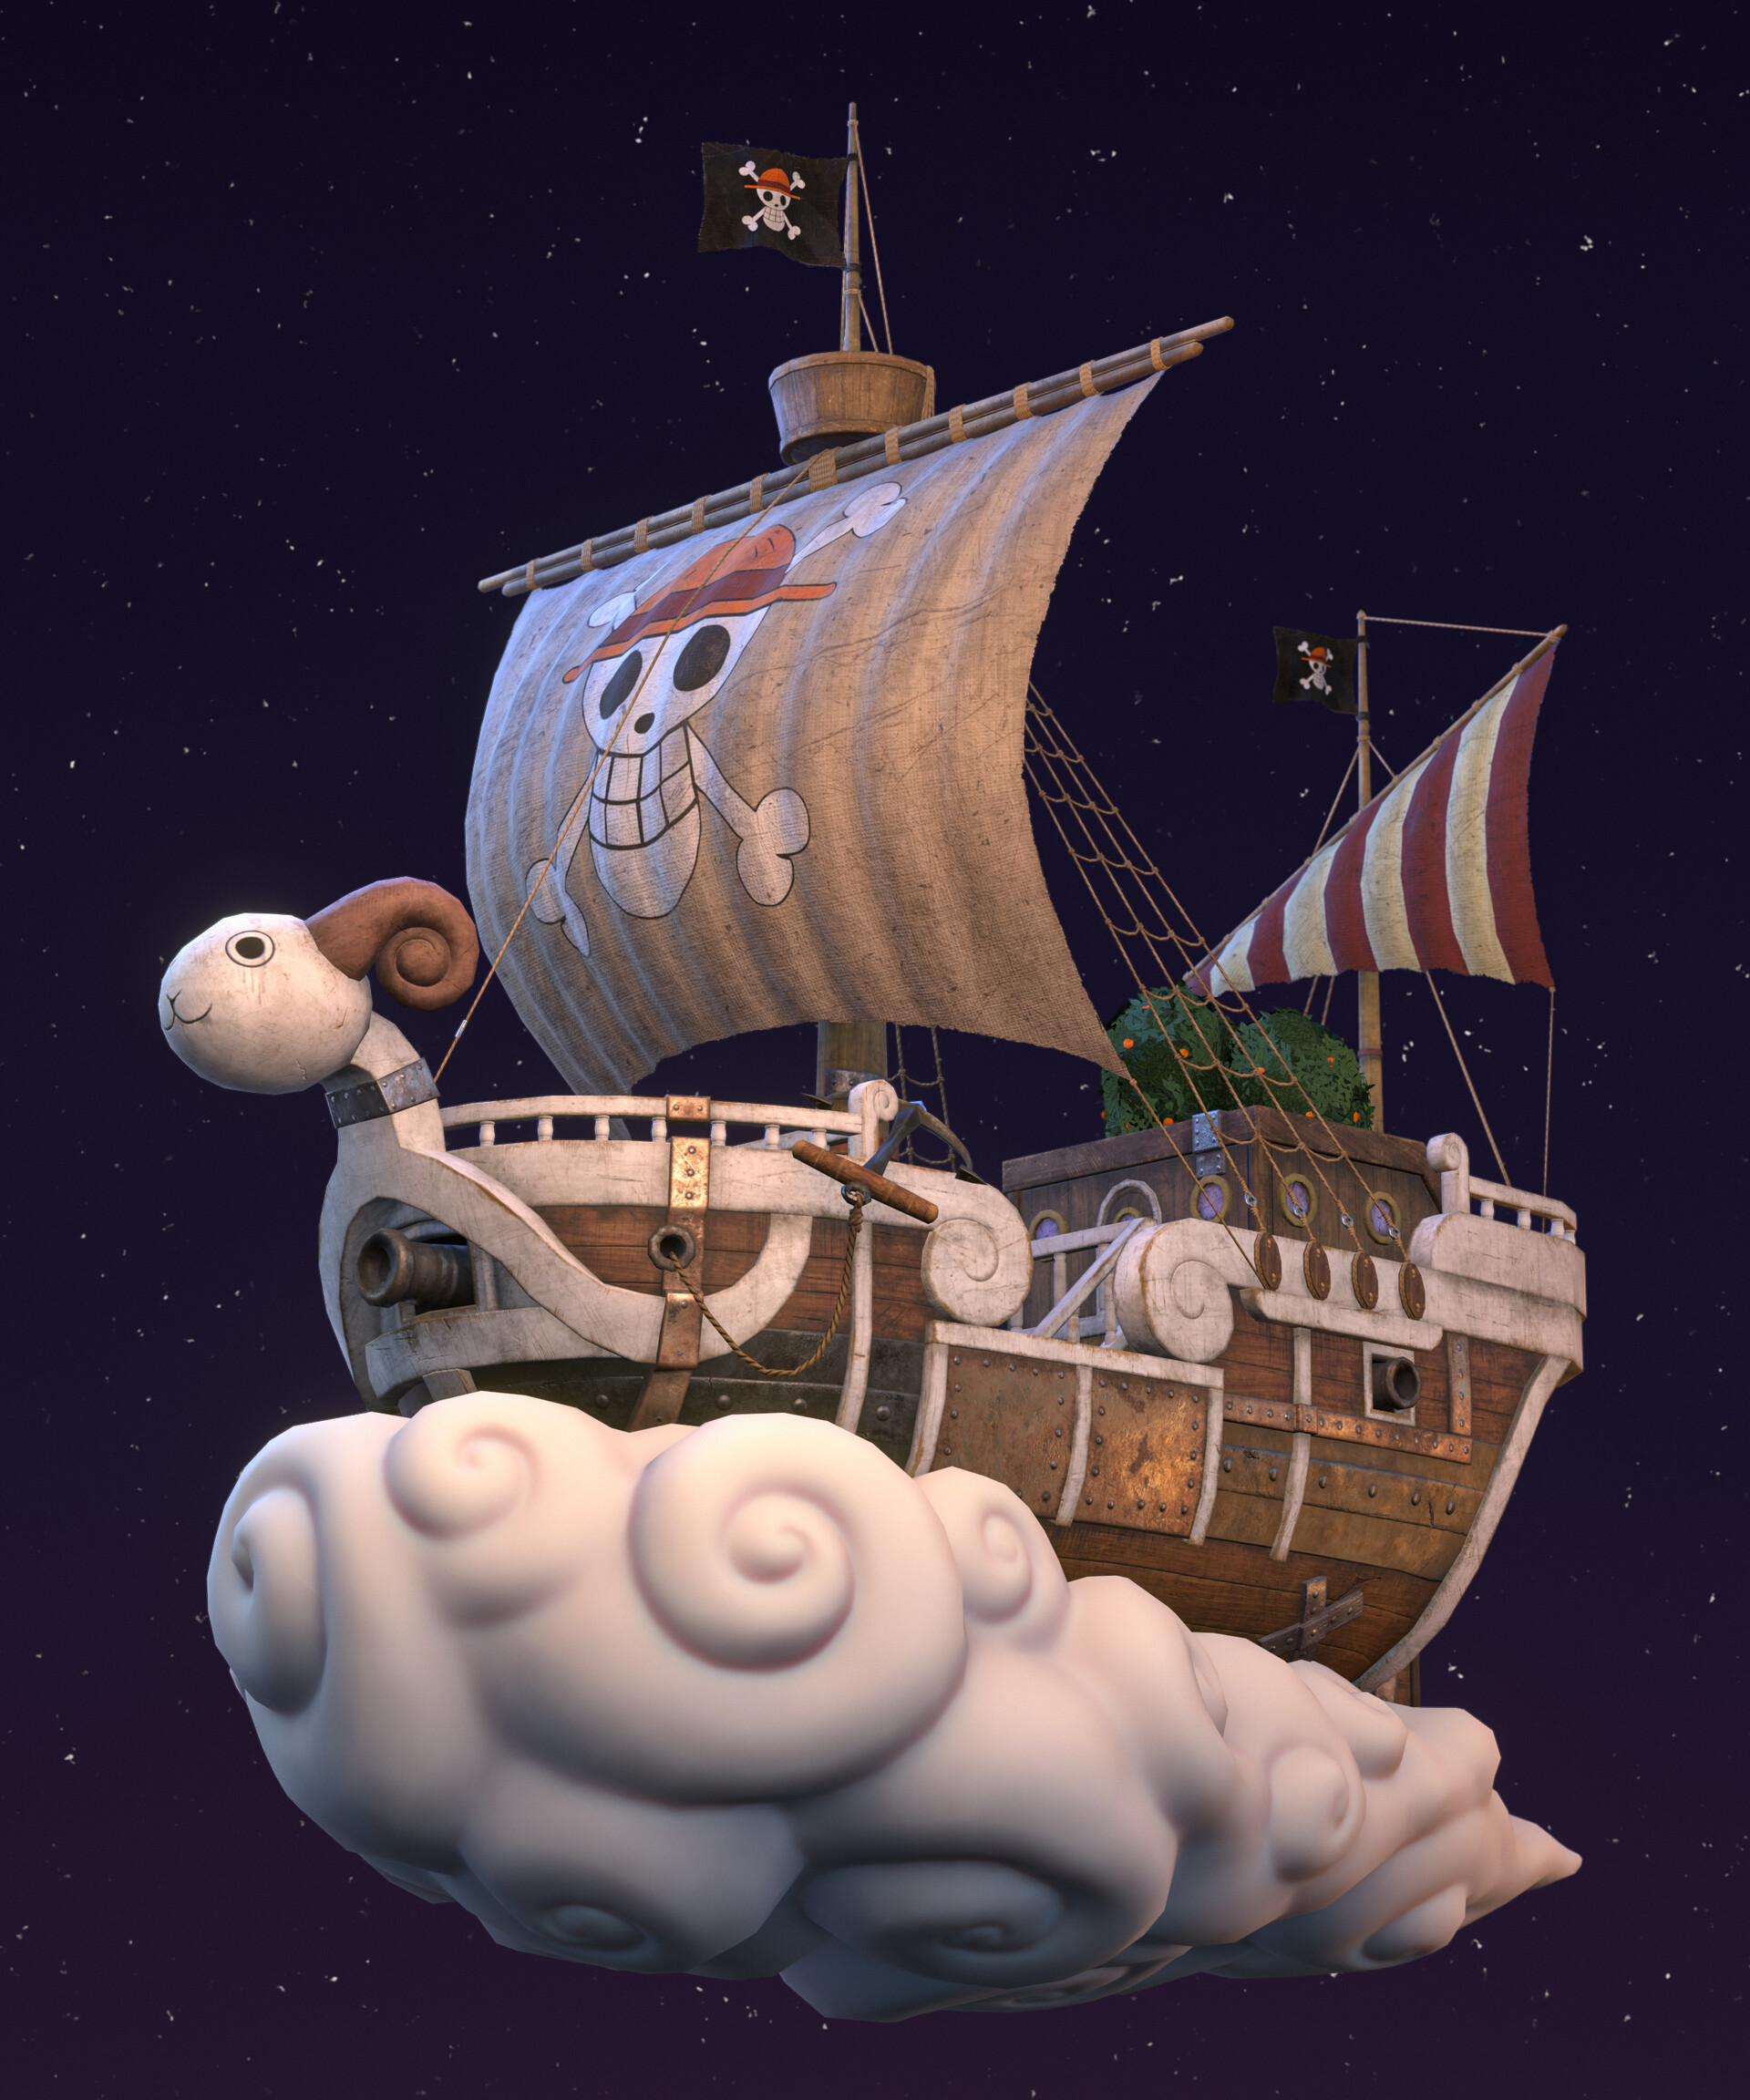 ArtStation - One Piece Going Merry Pirate Ship